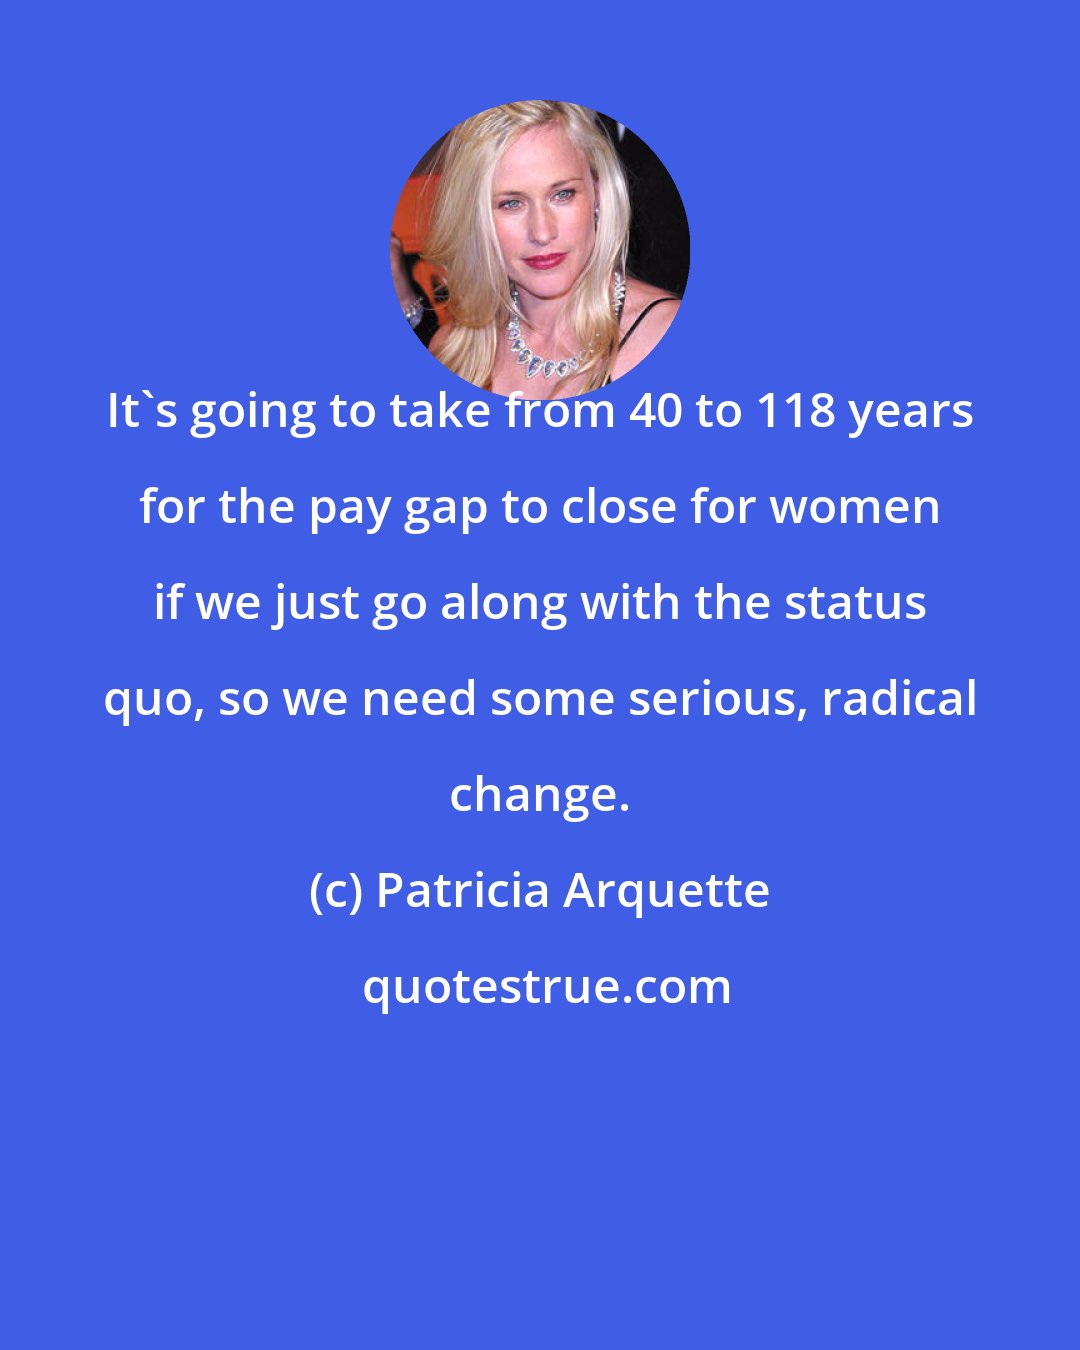 Patricia Arquette: It's going to take from 40 to 118 years for the pay gap to close for women if we just go along with the status quo, so we need some serious, radical change.